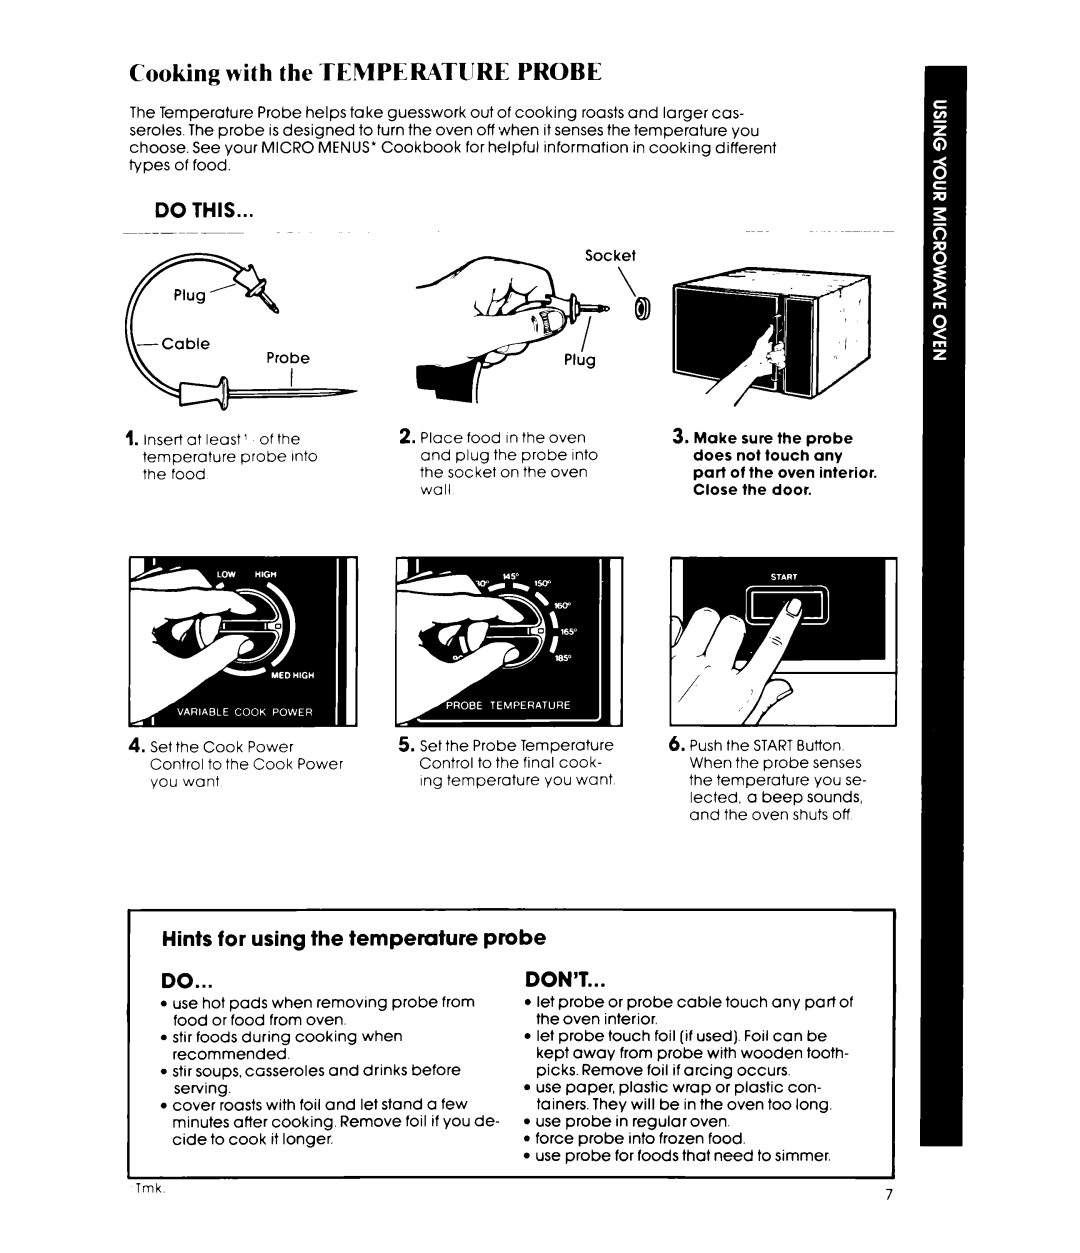 Whirlpool MW8300XP manual Cooking with the TEMPERATURE PROBE, Do This, Hints for using the temperuture probe, Don’T 